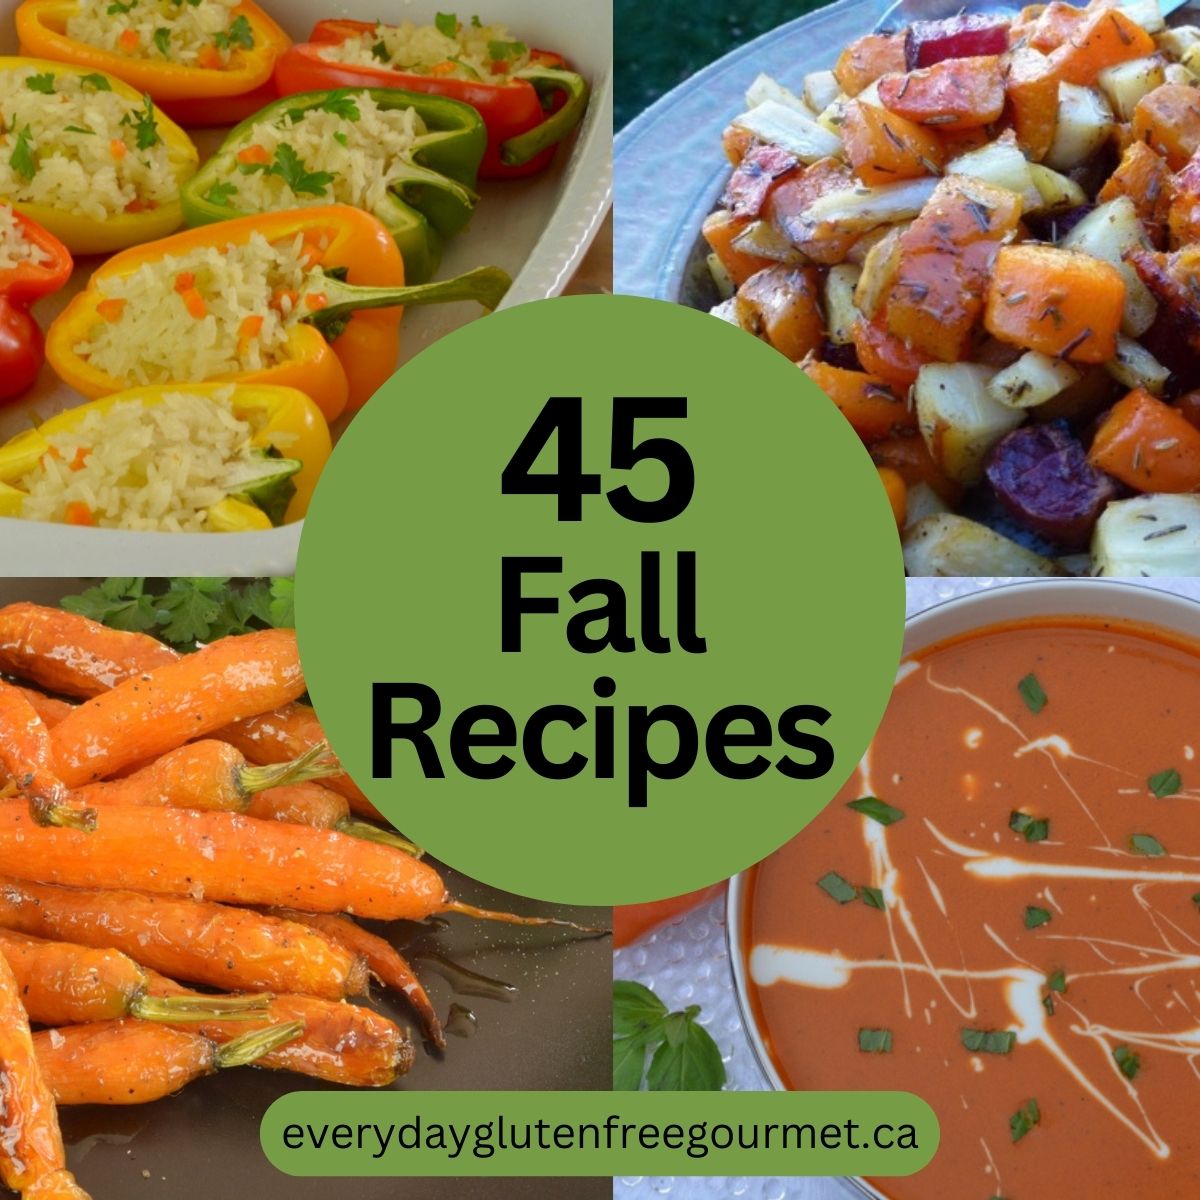 Four fall recipes; stuffed peppers, glazed carrots, roasted tomato soup and roasted root vegetables.